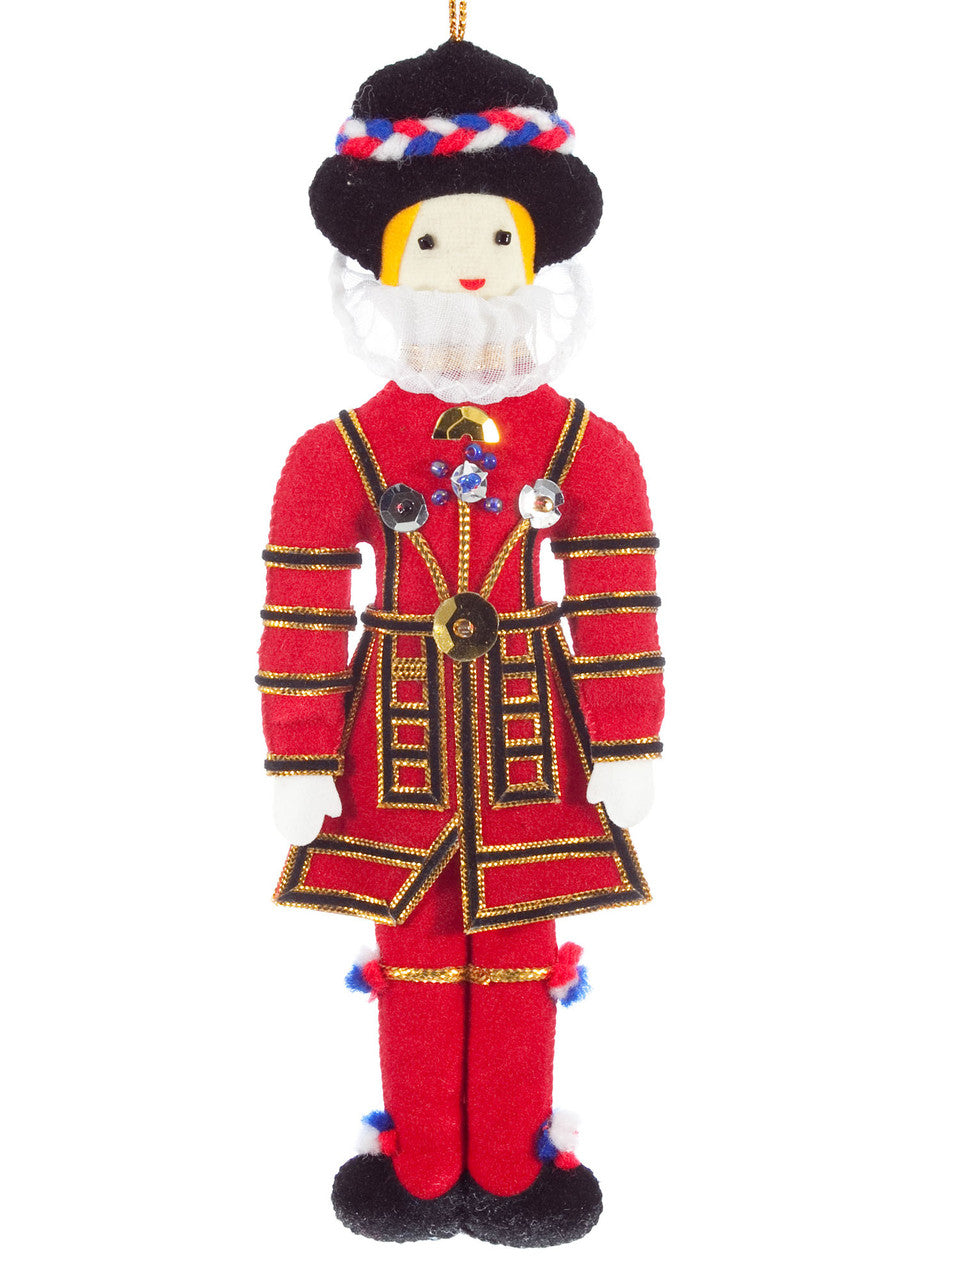 Beefeater Decoration by St. Nicolas.